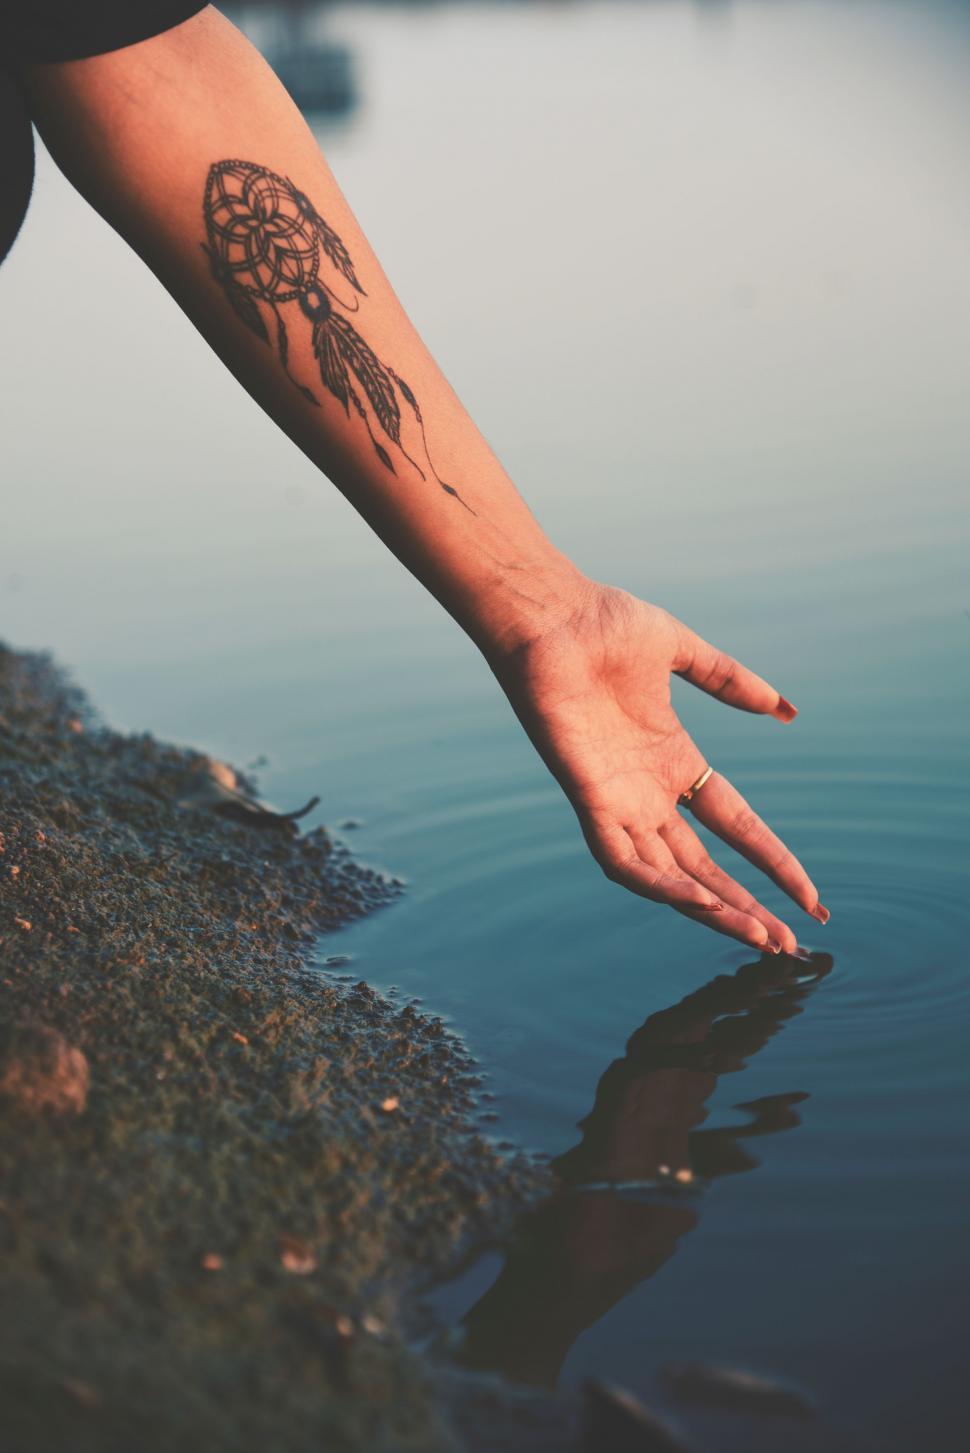 Free Image of Person Reaching for Object in Water 